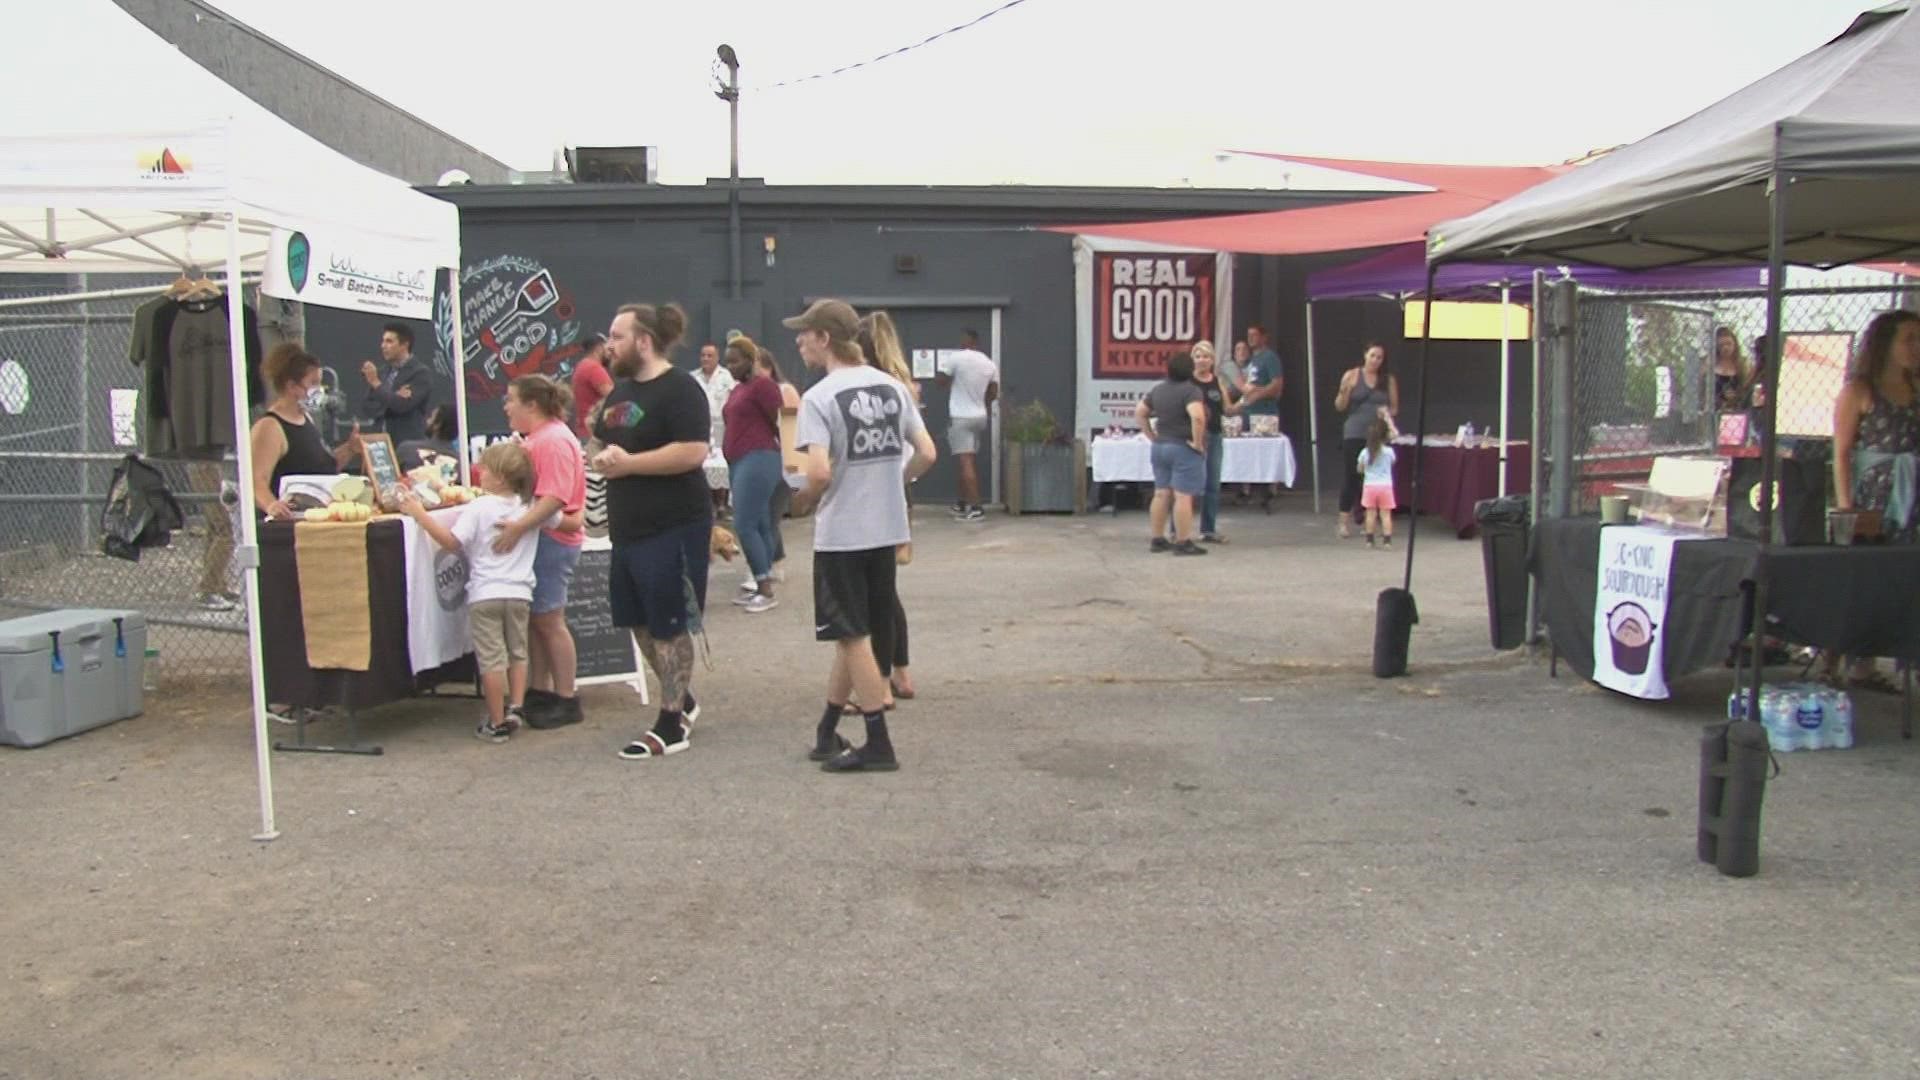 Officials said around 26 vendors participated in the sale, sharing their unique home-cooked meals with anyone who wants to stop by.